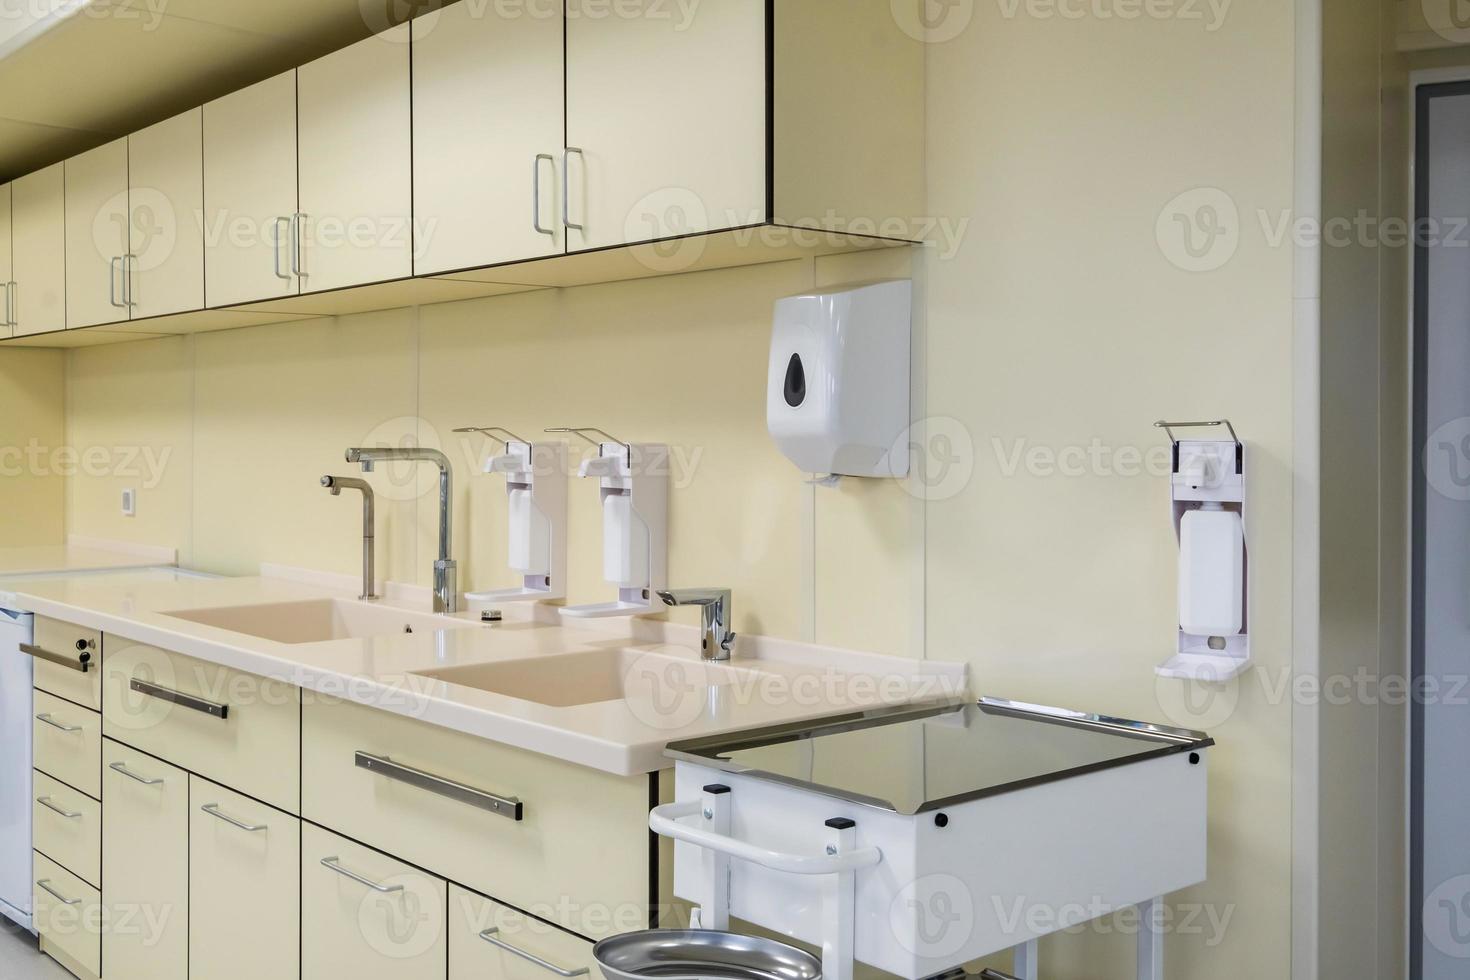 elbow soap and antiseptic dispenser or sanitizer wall mounted for hand disinfection and water tap sink with faucet bathroom or clinic photo